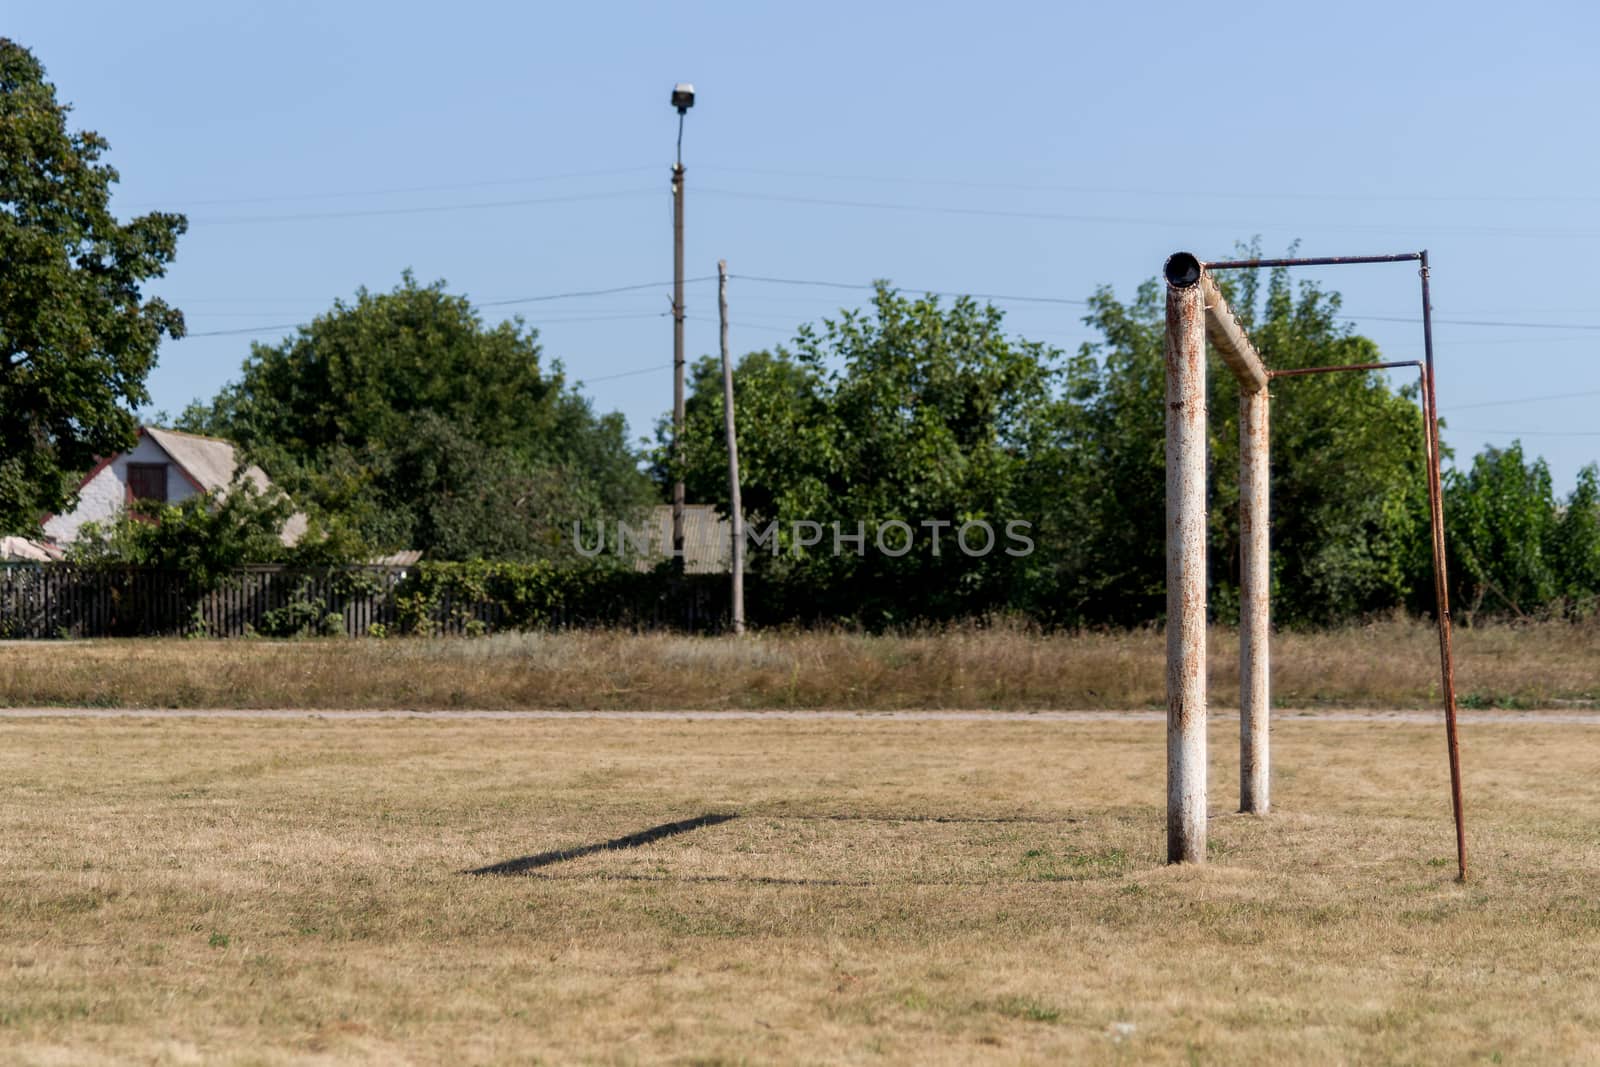 The empty football field with soccer goal in village. The grass  by alexsdriver